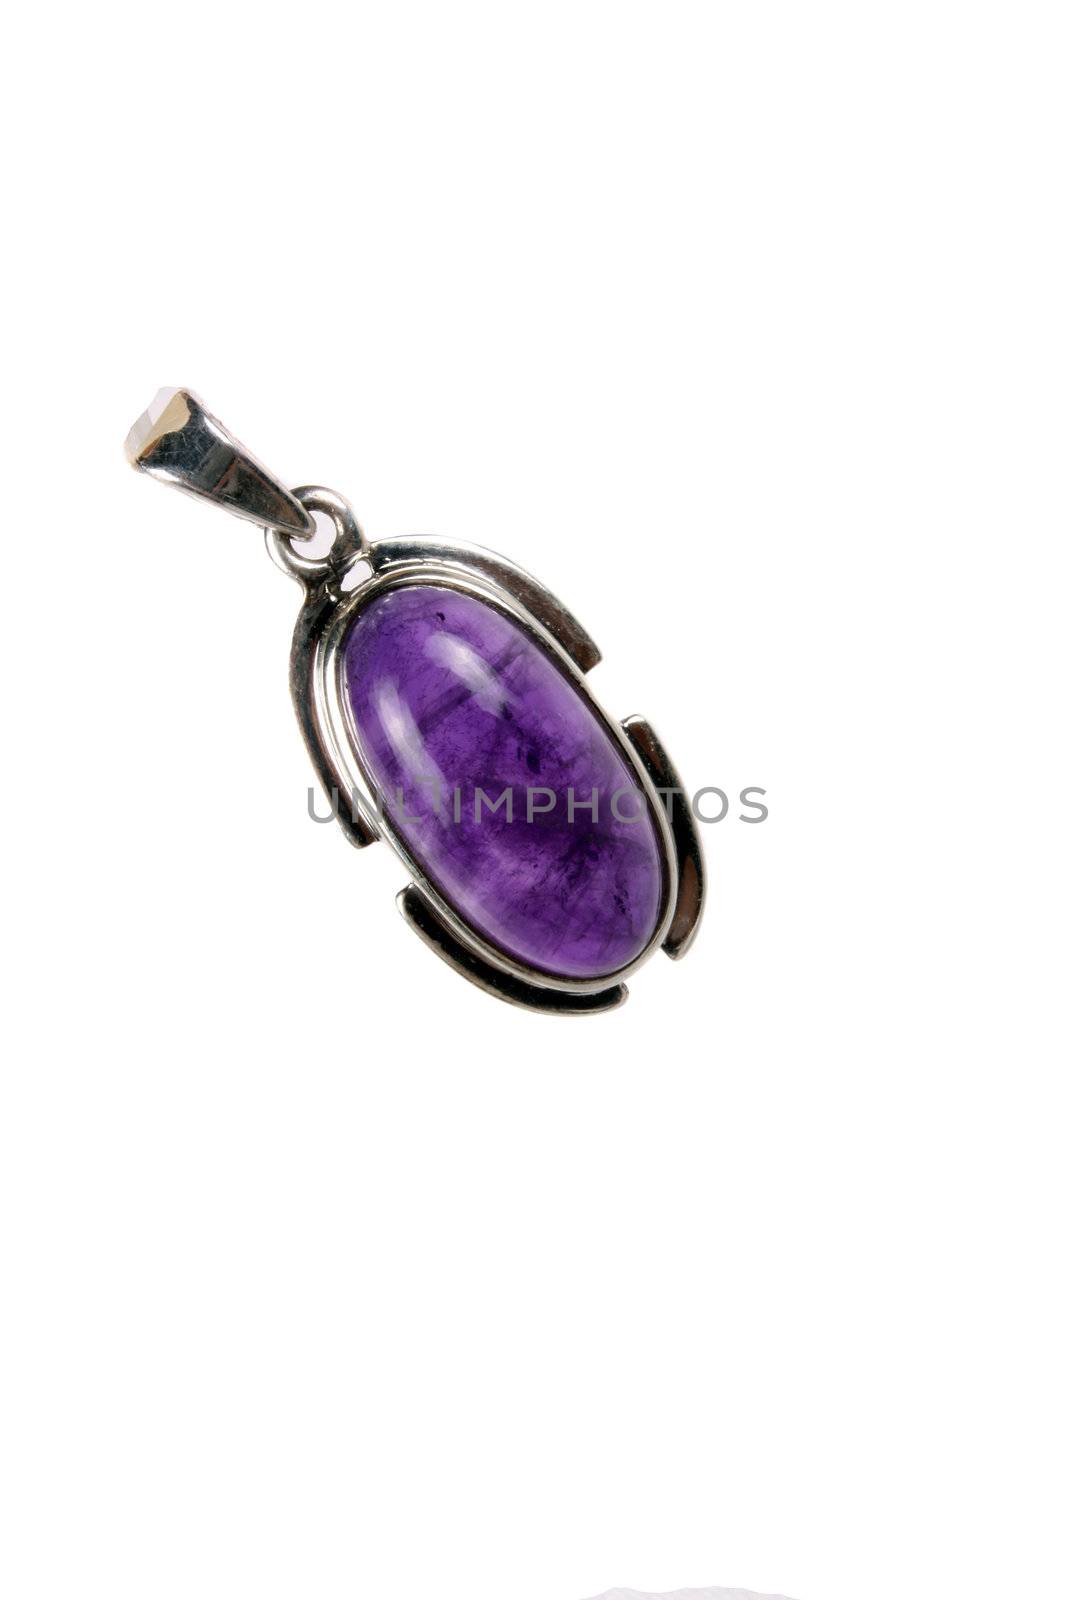 Amethyst Pendant by thefinalmiracle